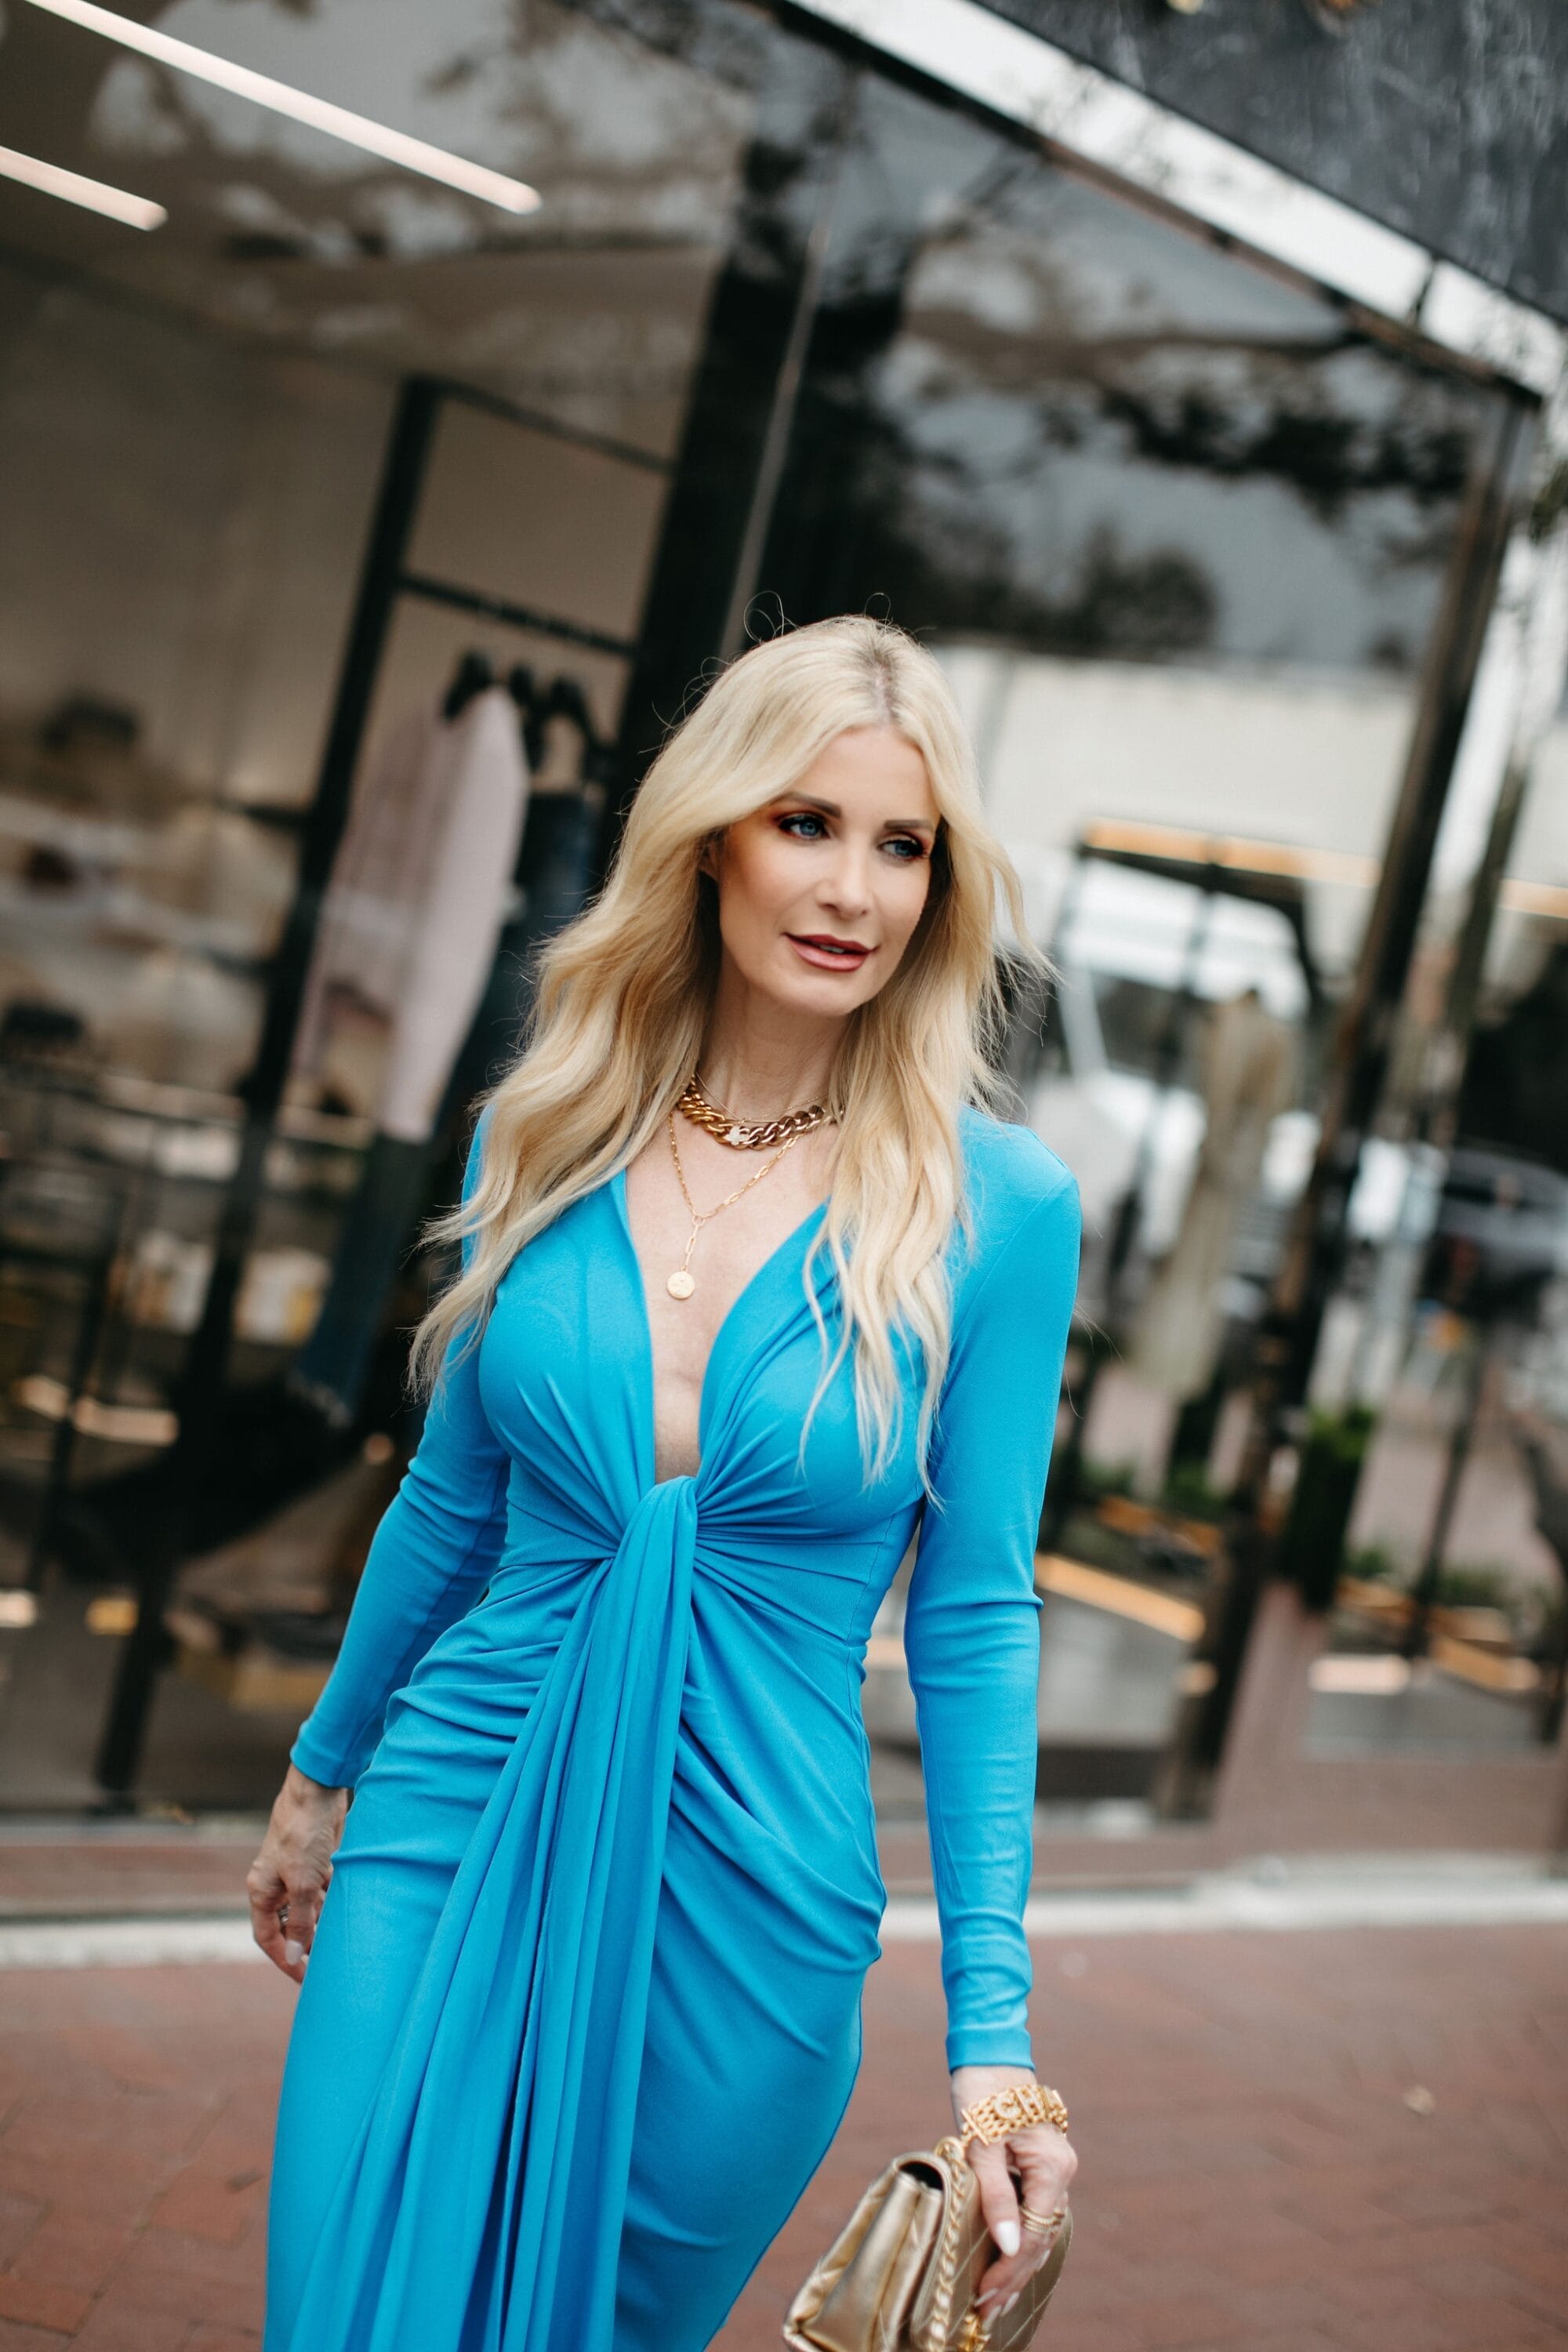 Dallas over 40 fashion icon wearing midi dress in AZURE blue as one of seven resort wear looks for 2023.